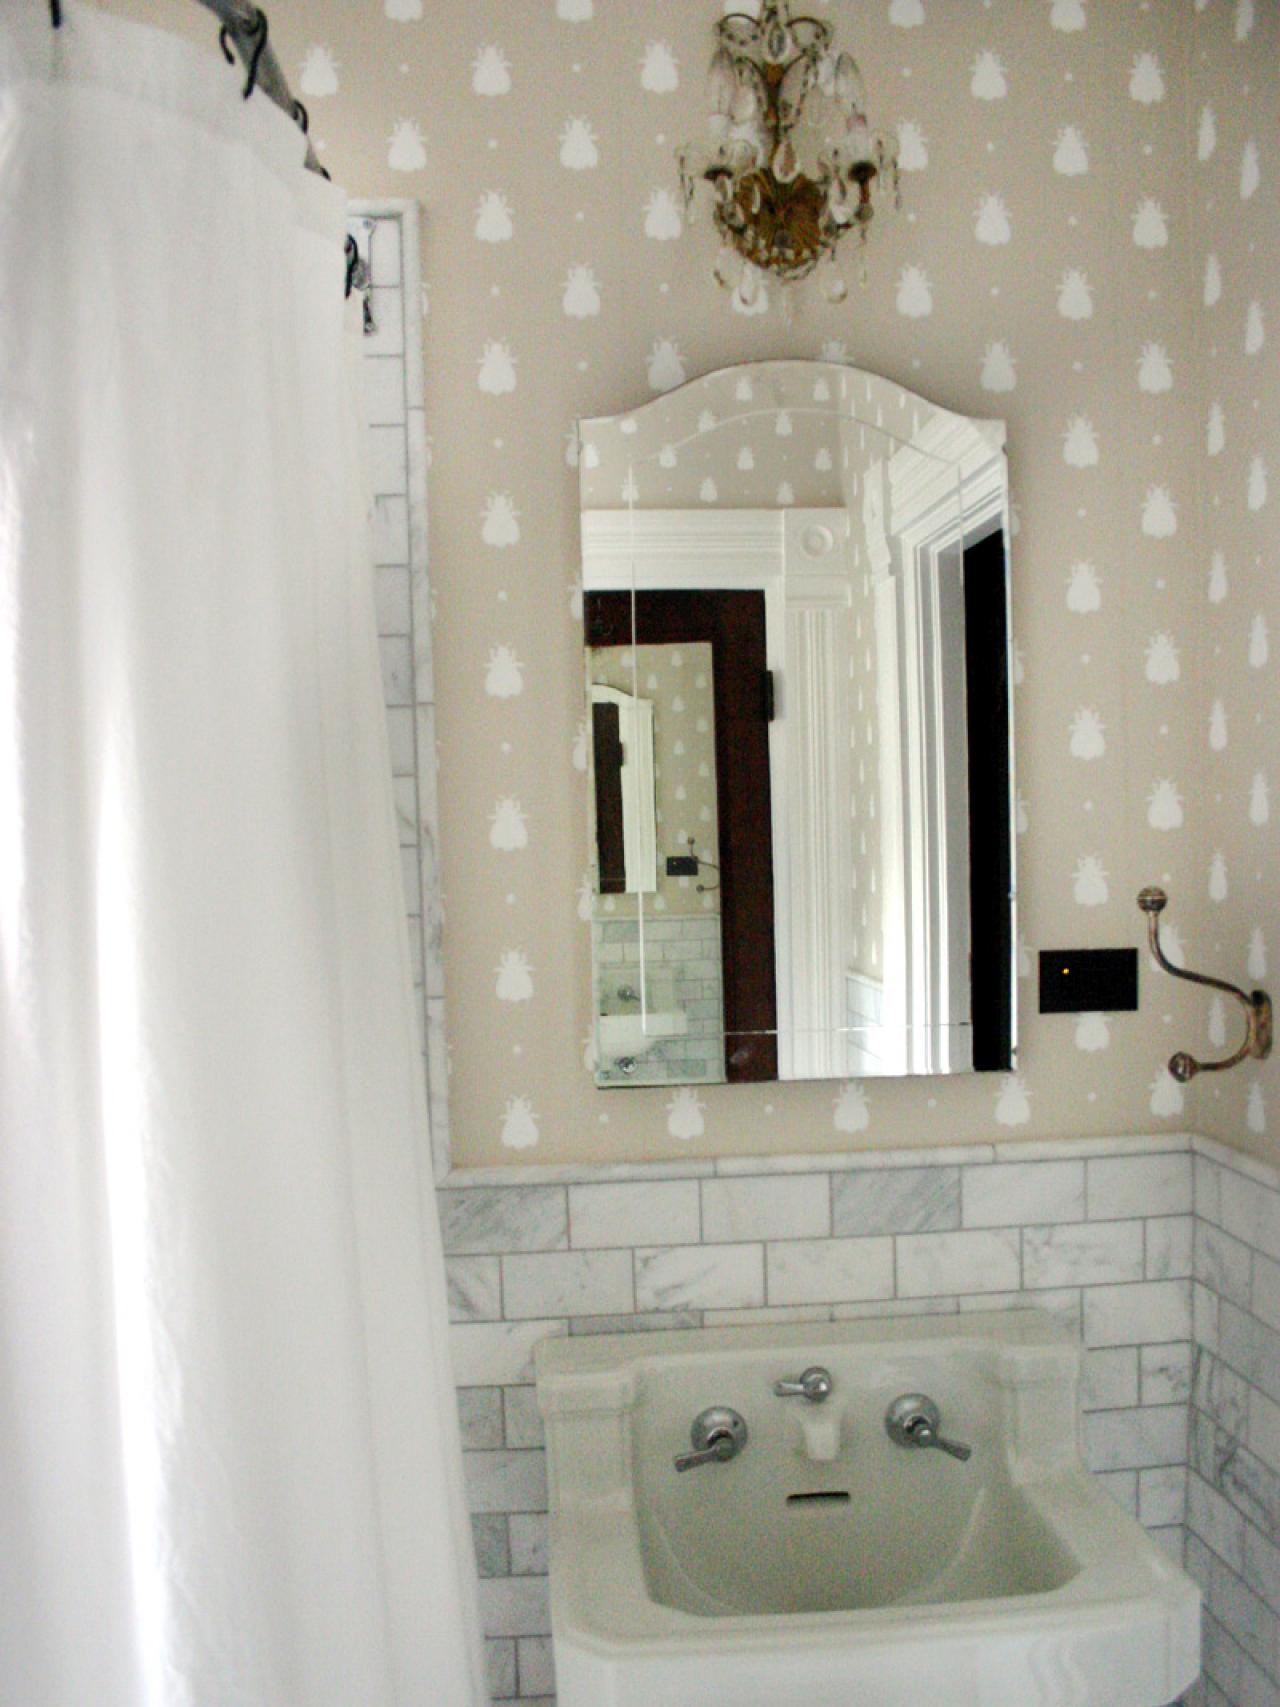 Traditional Bathroom With Fun Wallpaper Patterned Adds A